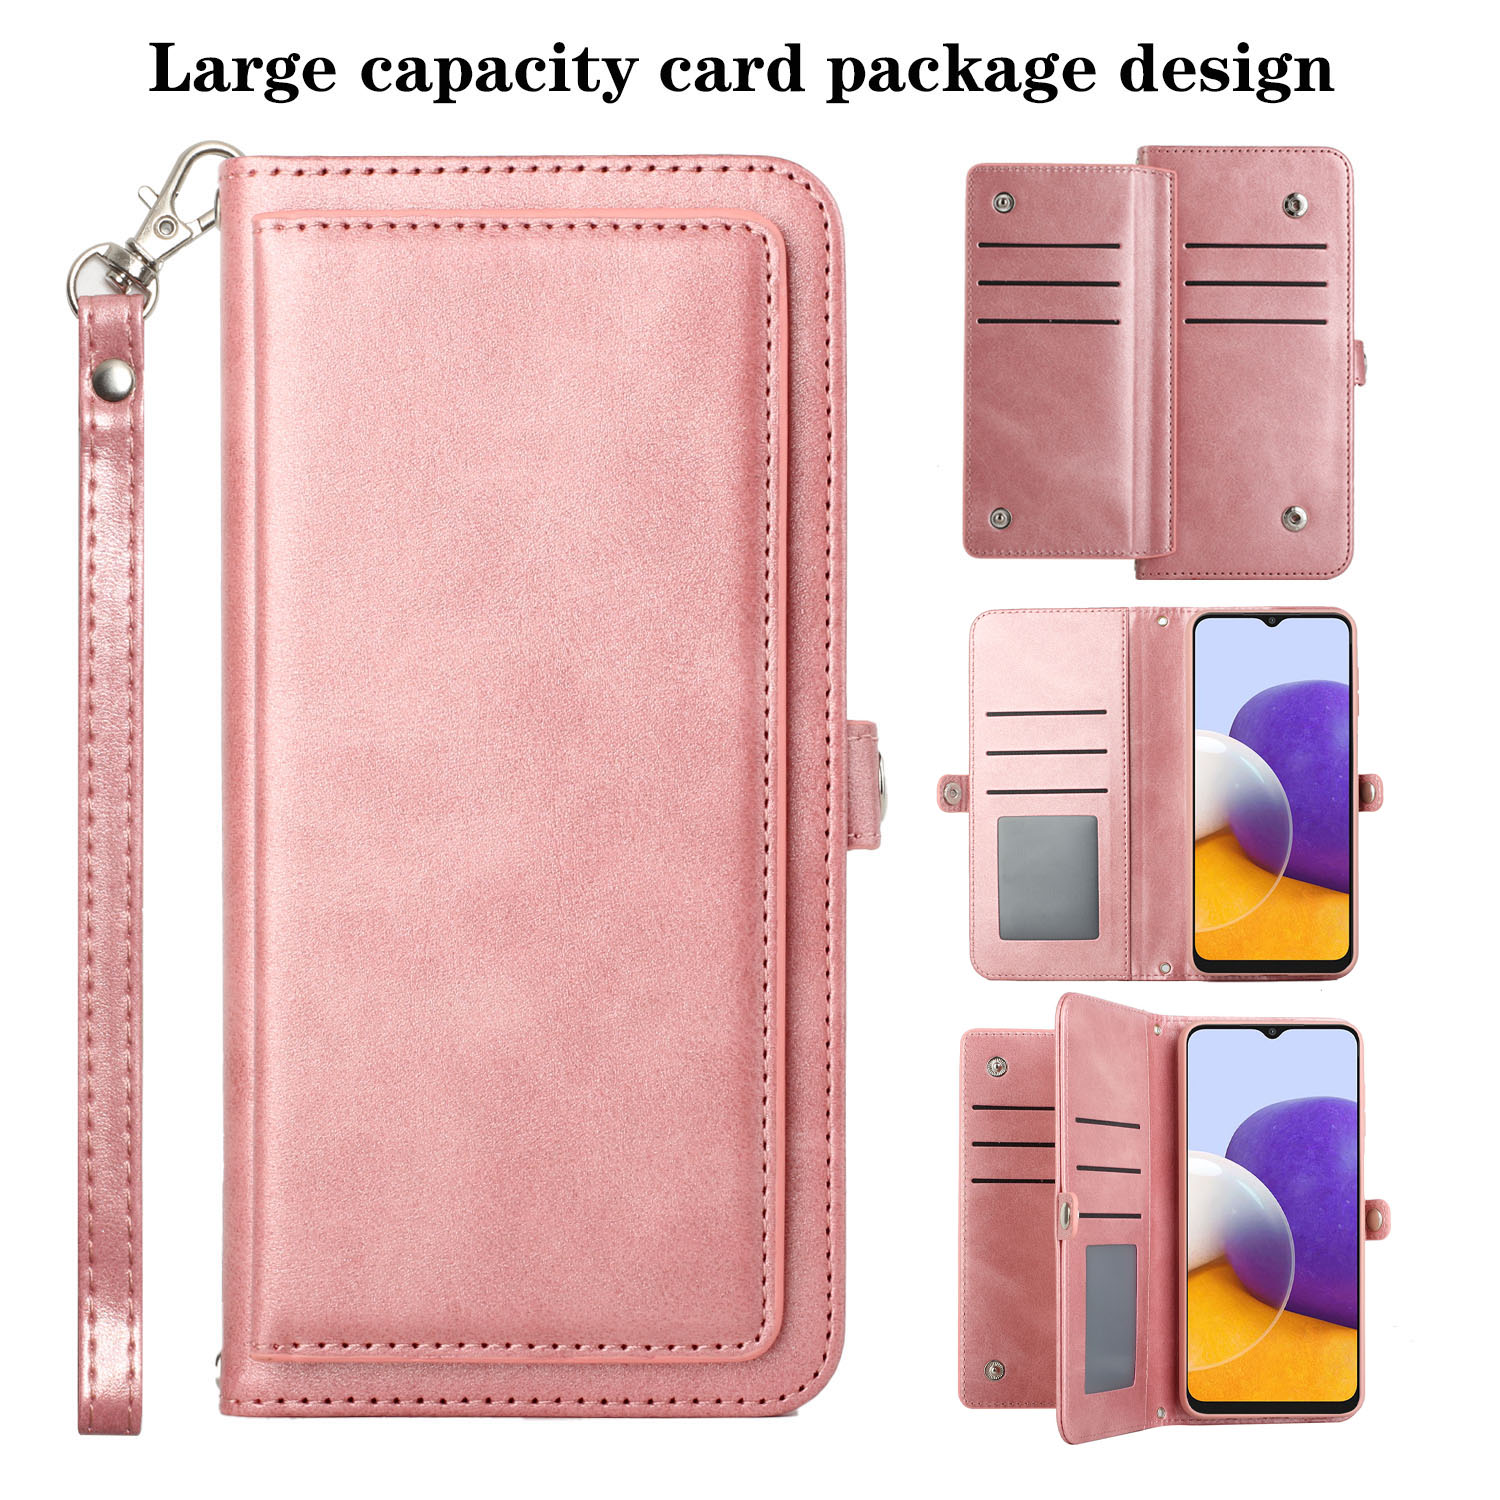 Premium PU Leather Folio WALLET Front Cover Case for Galaxy A22 4G (Pink)